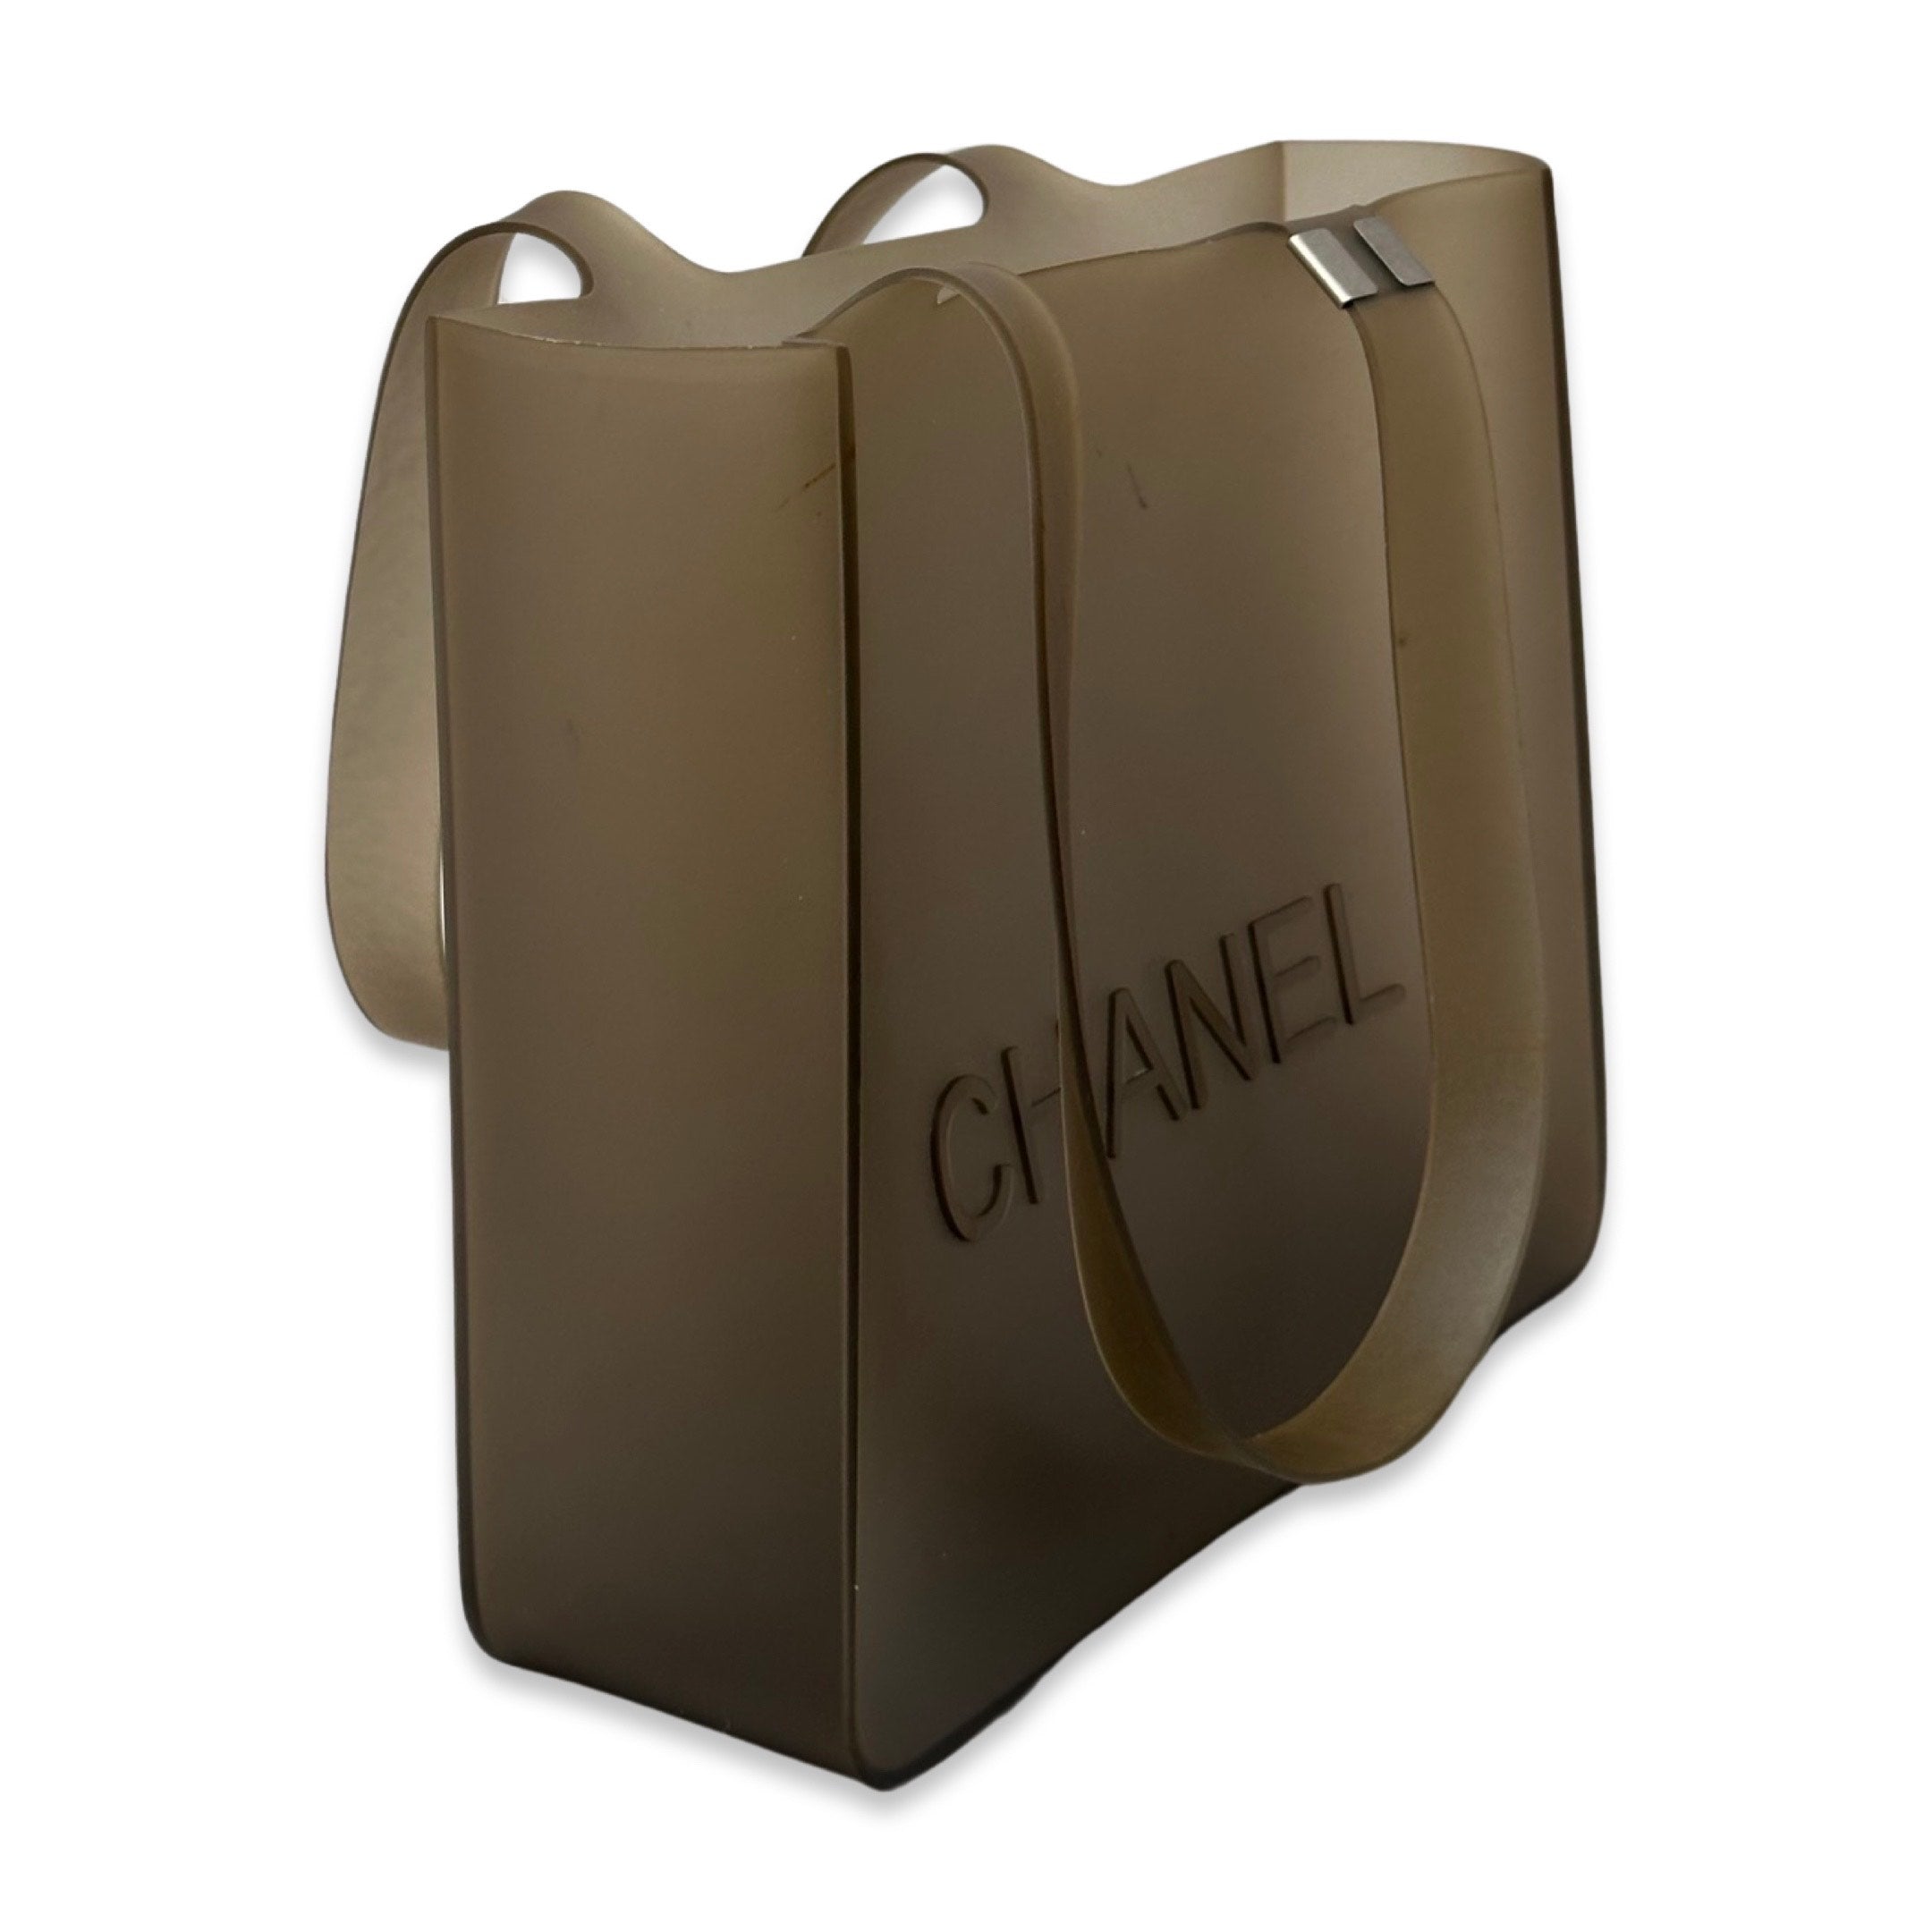 Chanel Clear Rubber Jelly Tote Bag – Timeless Vintage Company